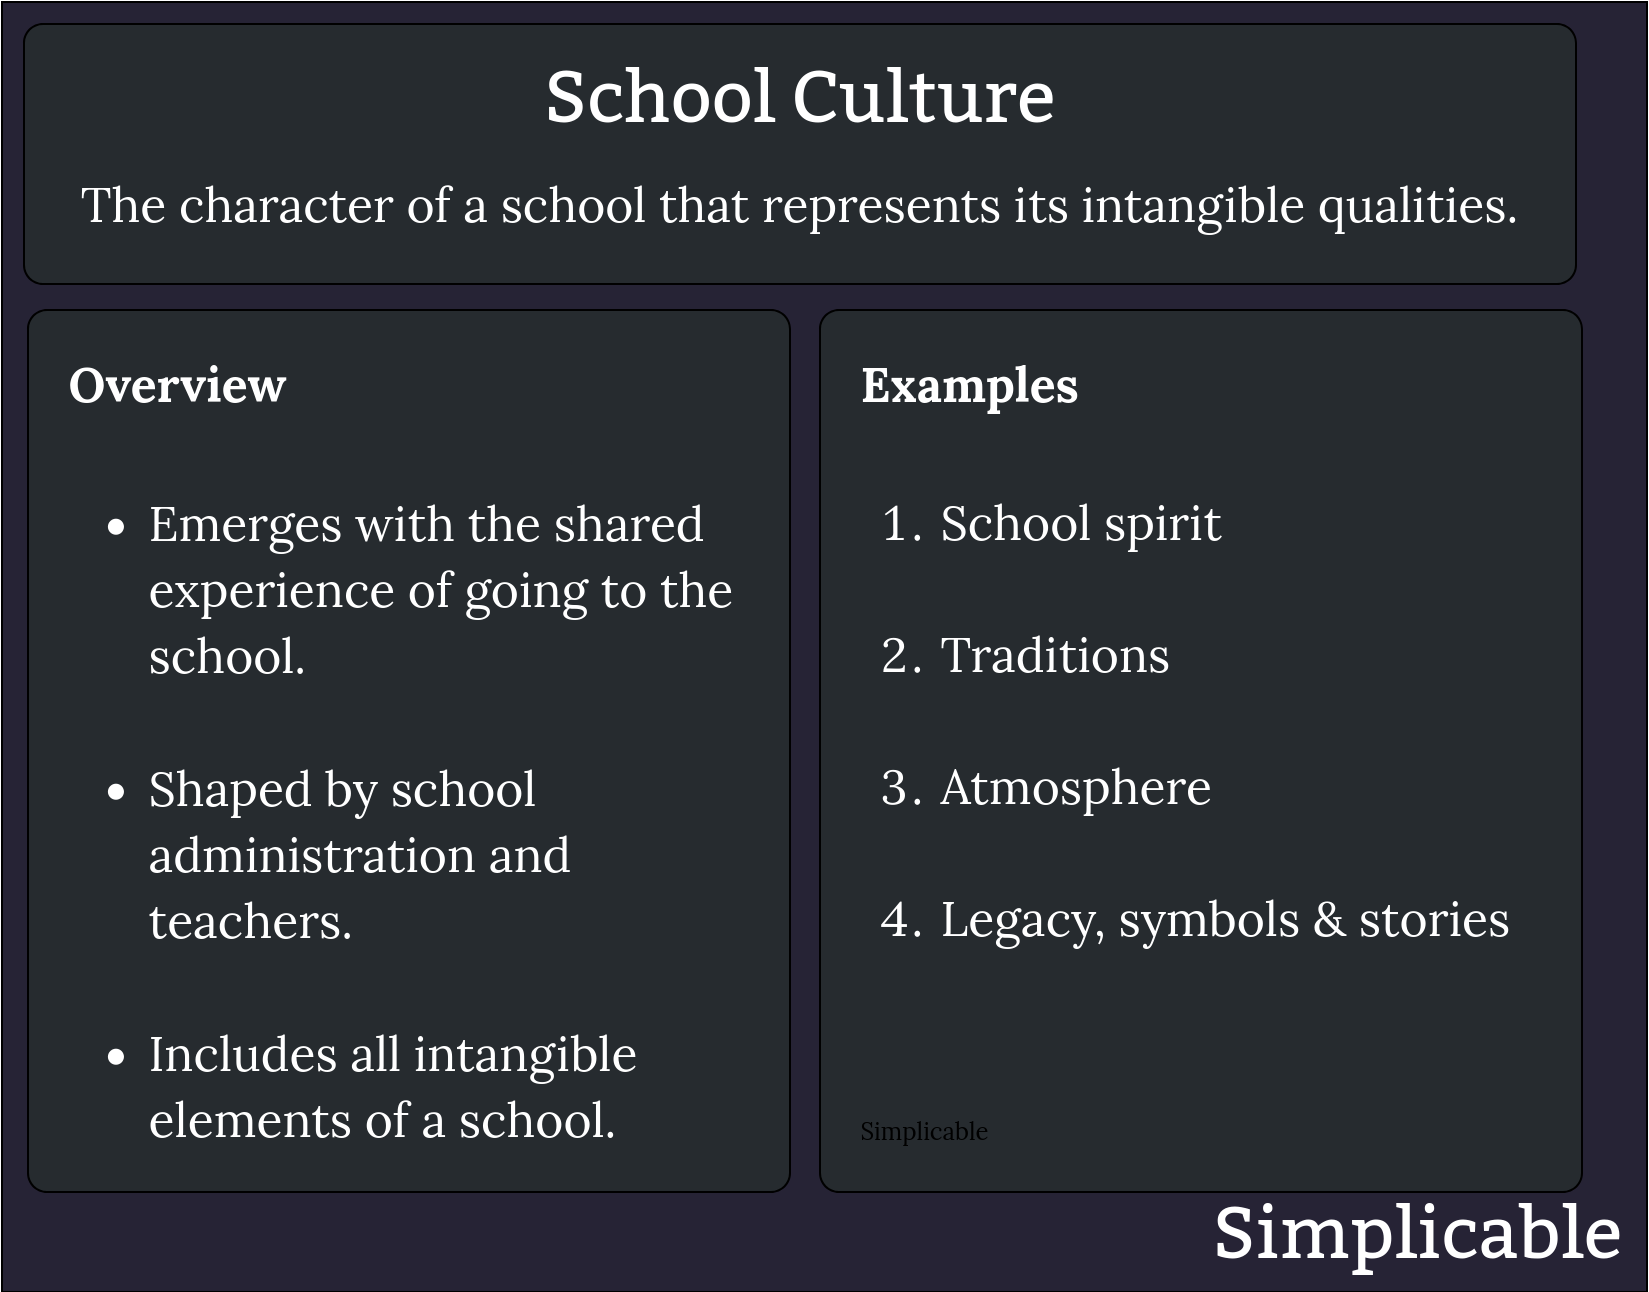 overview of school culture simplicable